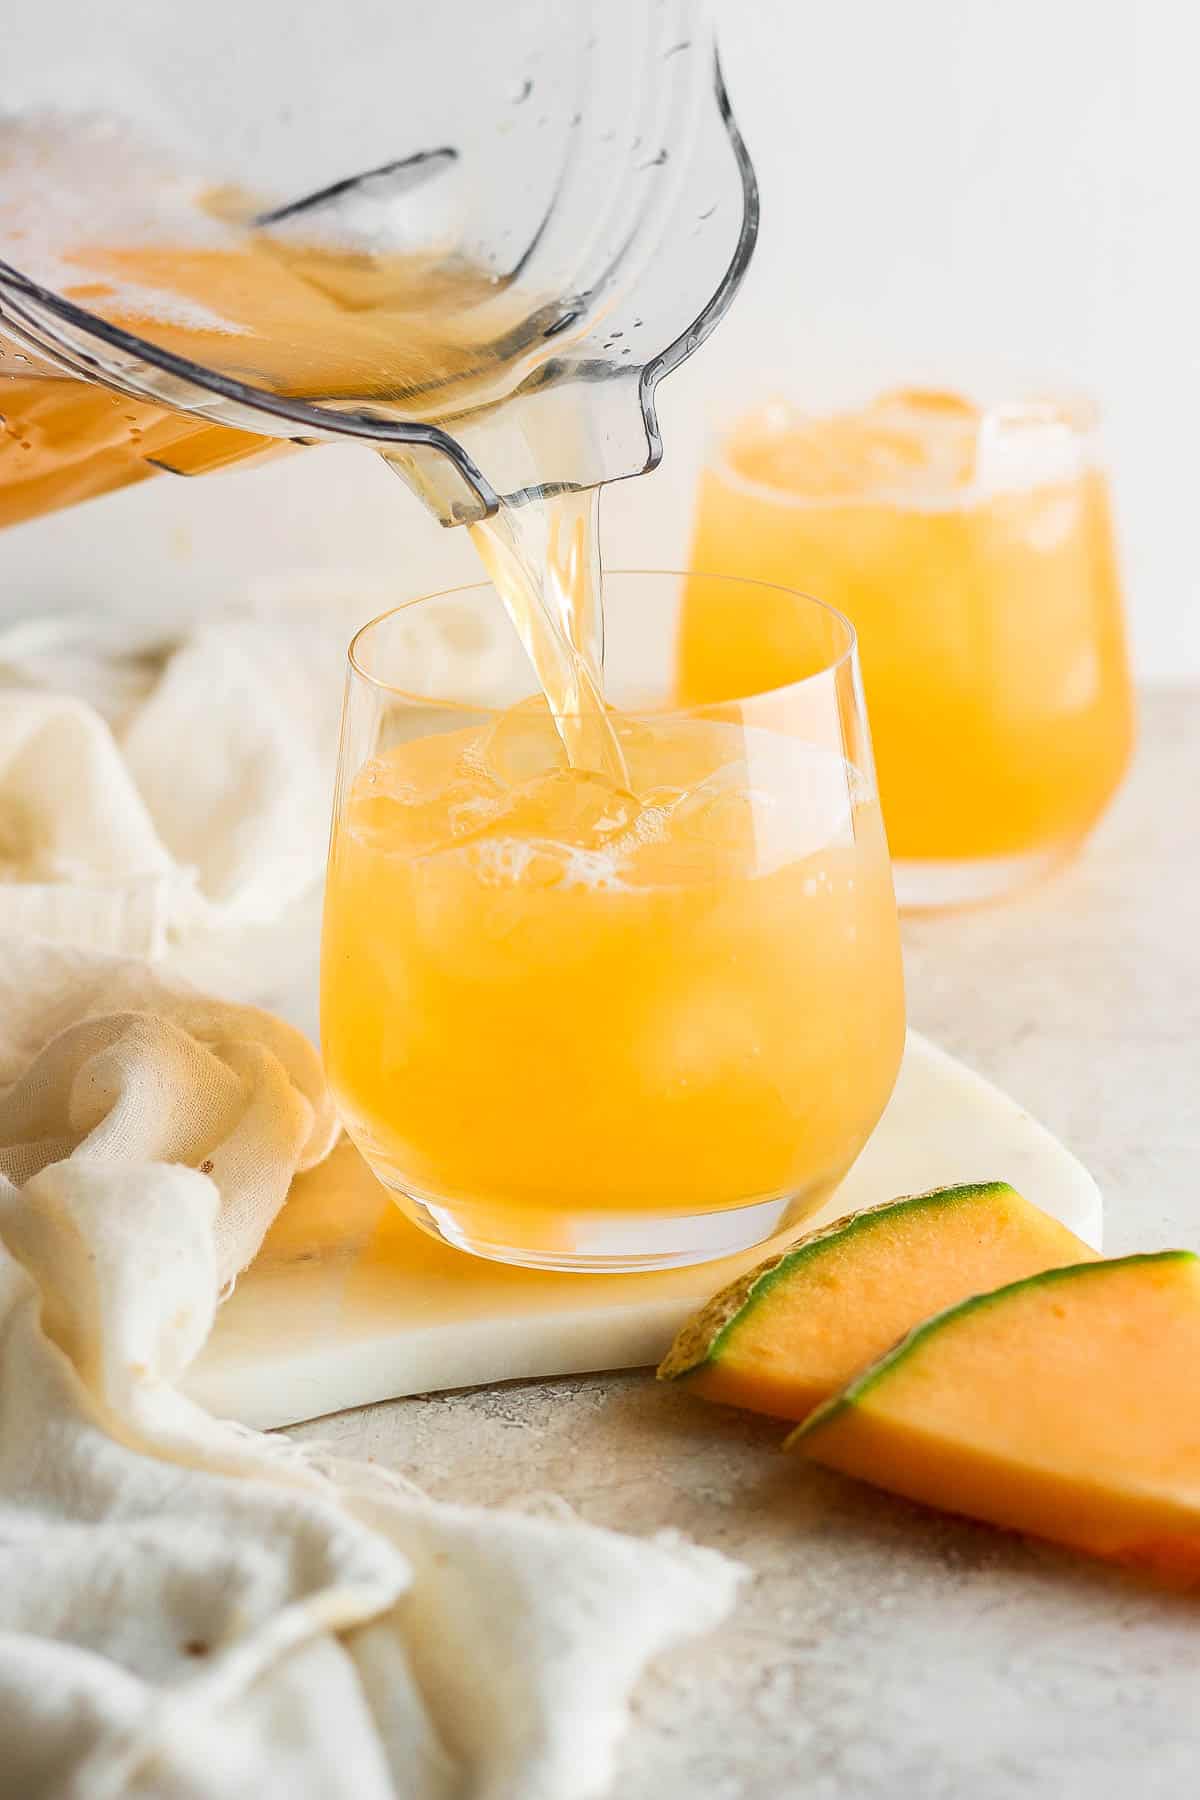 Agua de melon being poured into a glass for serving.